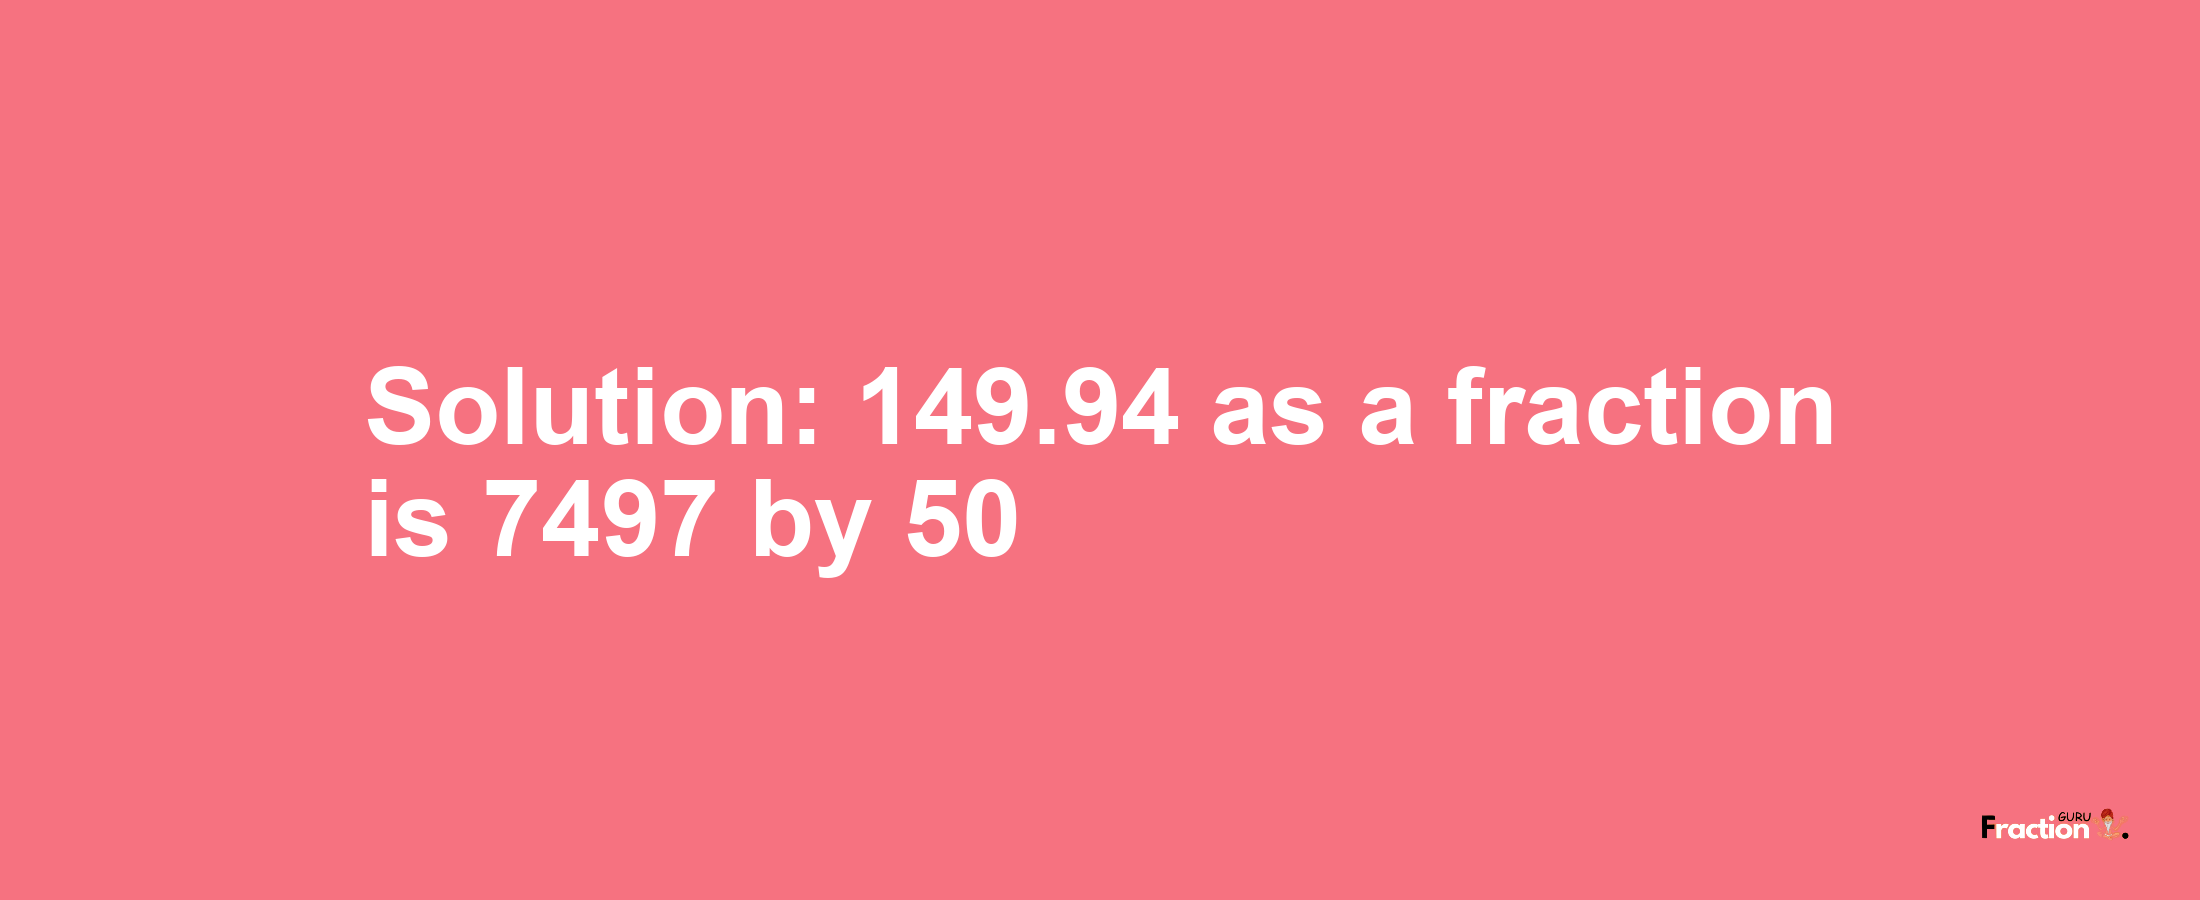 Solution:149.94 as a fraction is 7497/50